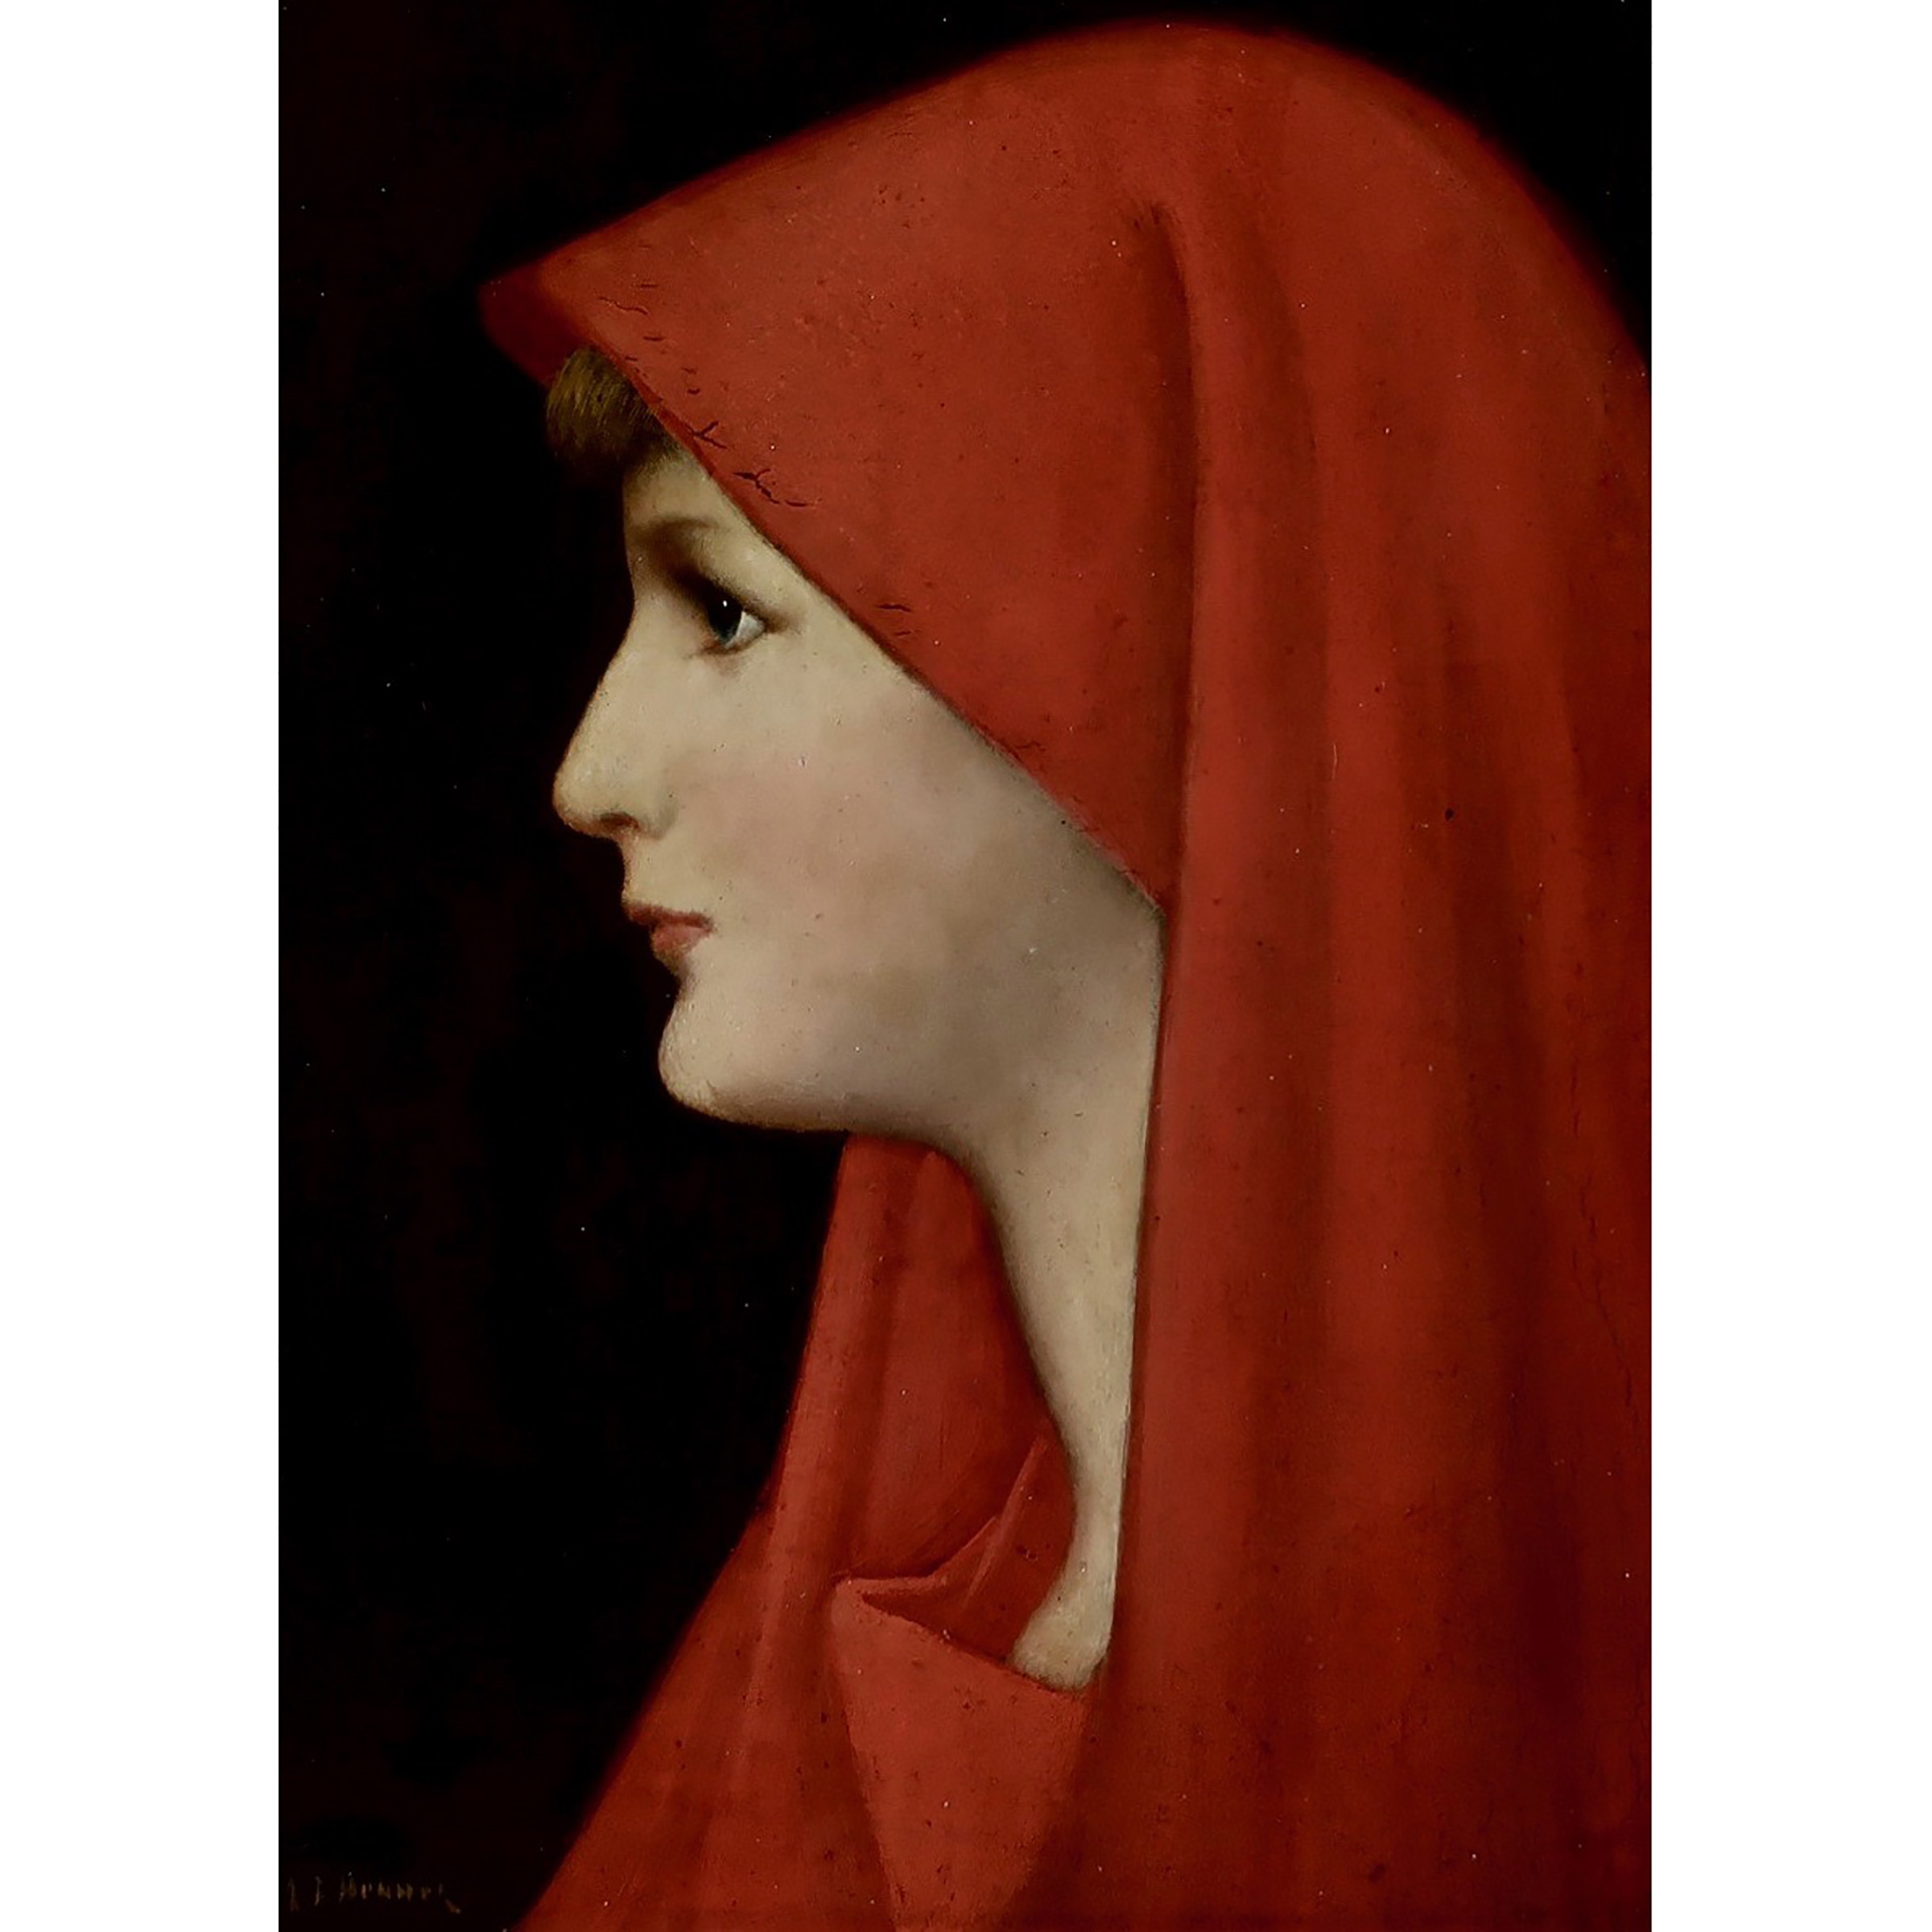 Artwork by Jean-Jacques Henner, FABIOLA, Made of OIL ON PANEL